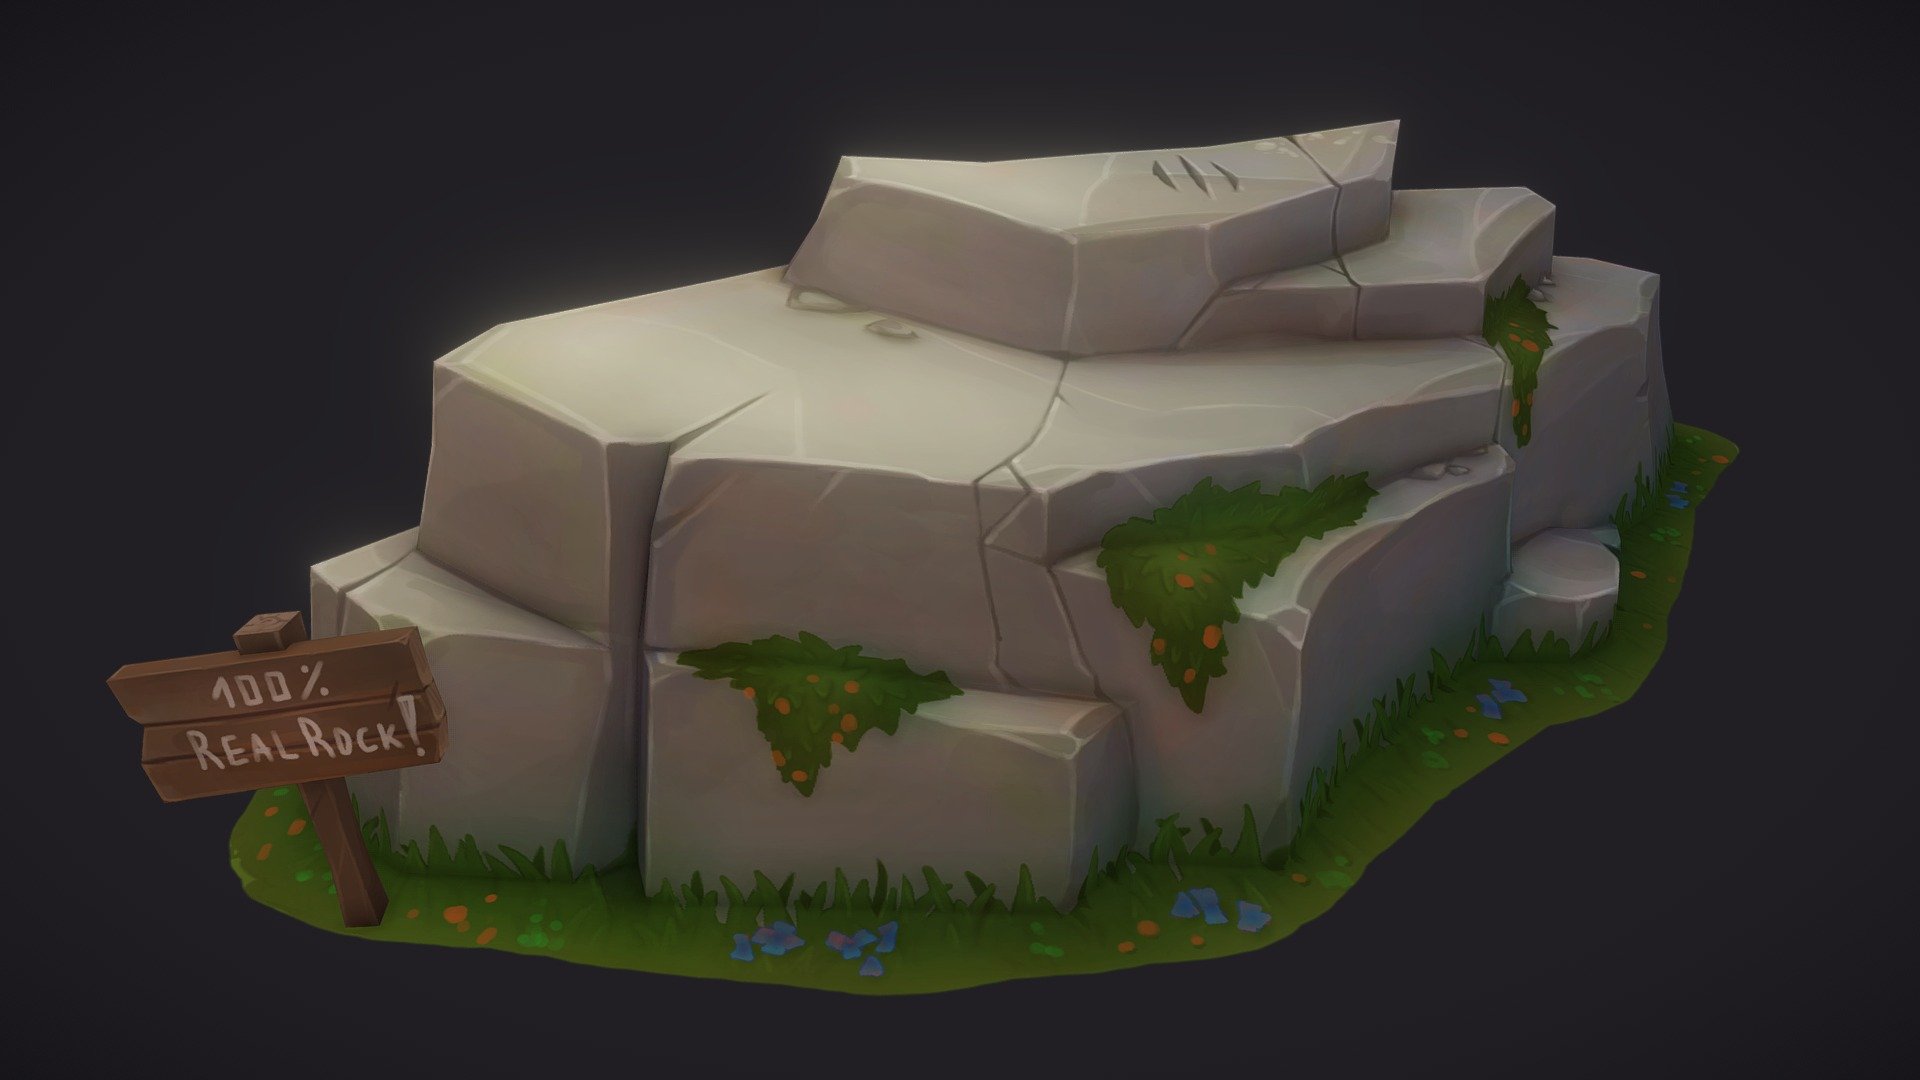 Handpainted Rock from my Free YouTube Tutorial! :)
Starting Tutorial series of Handpainted/Stylized Environments! 
Followed by a Full Course with Mentorship later on! Lets Rock!

YouTube:
https://youtube.com/@ZugZugArt
Check out my Handpainted Weapon Course:
https://www.artstation.com/a/32558042
ZugZug Discord Art Community
https://discord.gg/u4AQwZcAEp - 100% Real Stylized Rock - Buy Royalty Free 3D model by ZugZug Art (@zugzug) 3d model